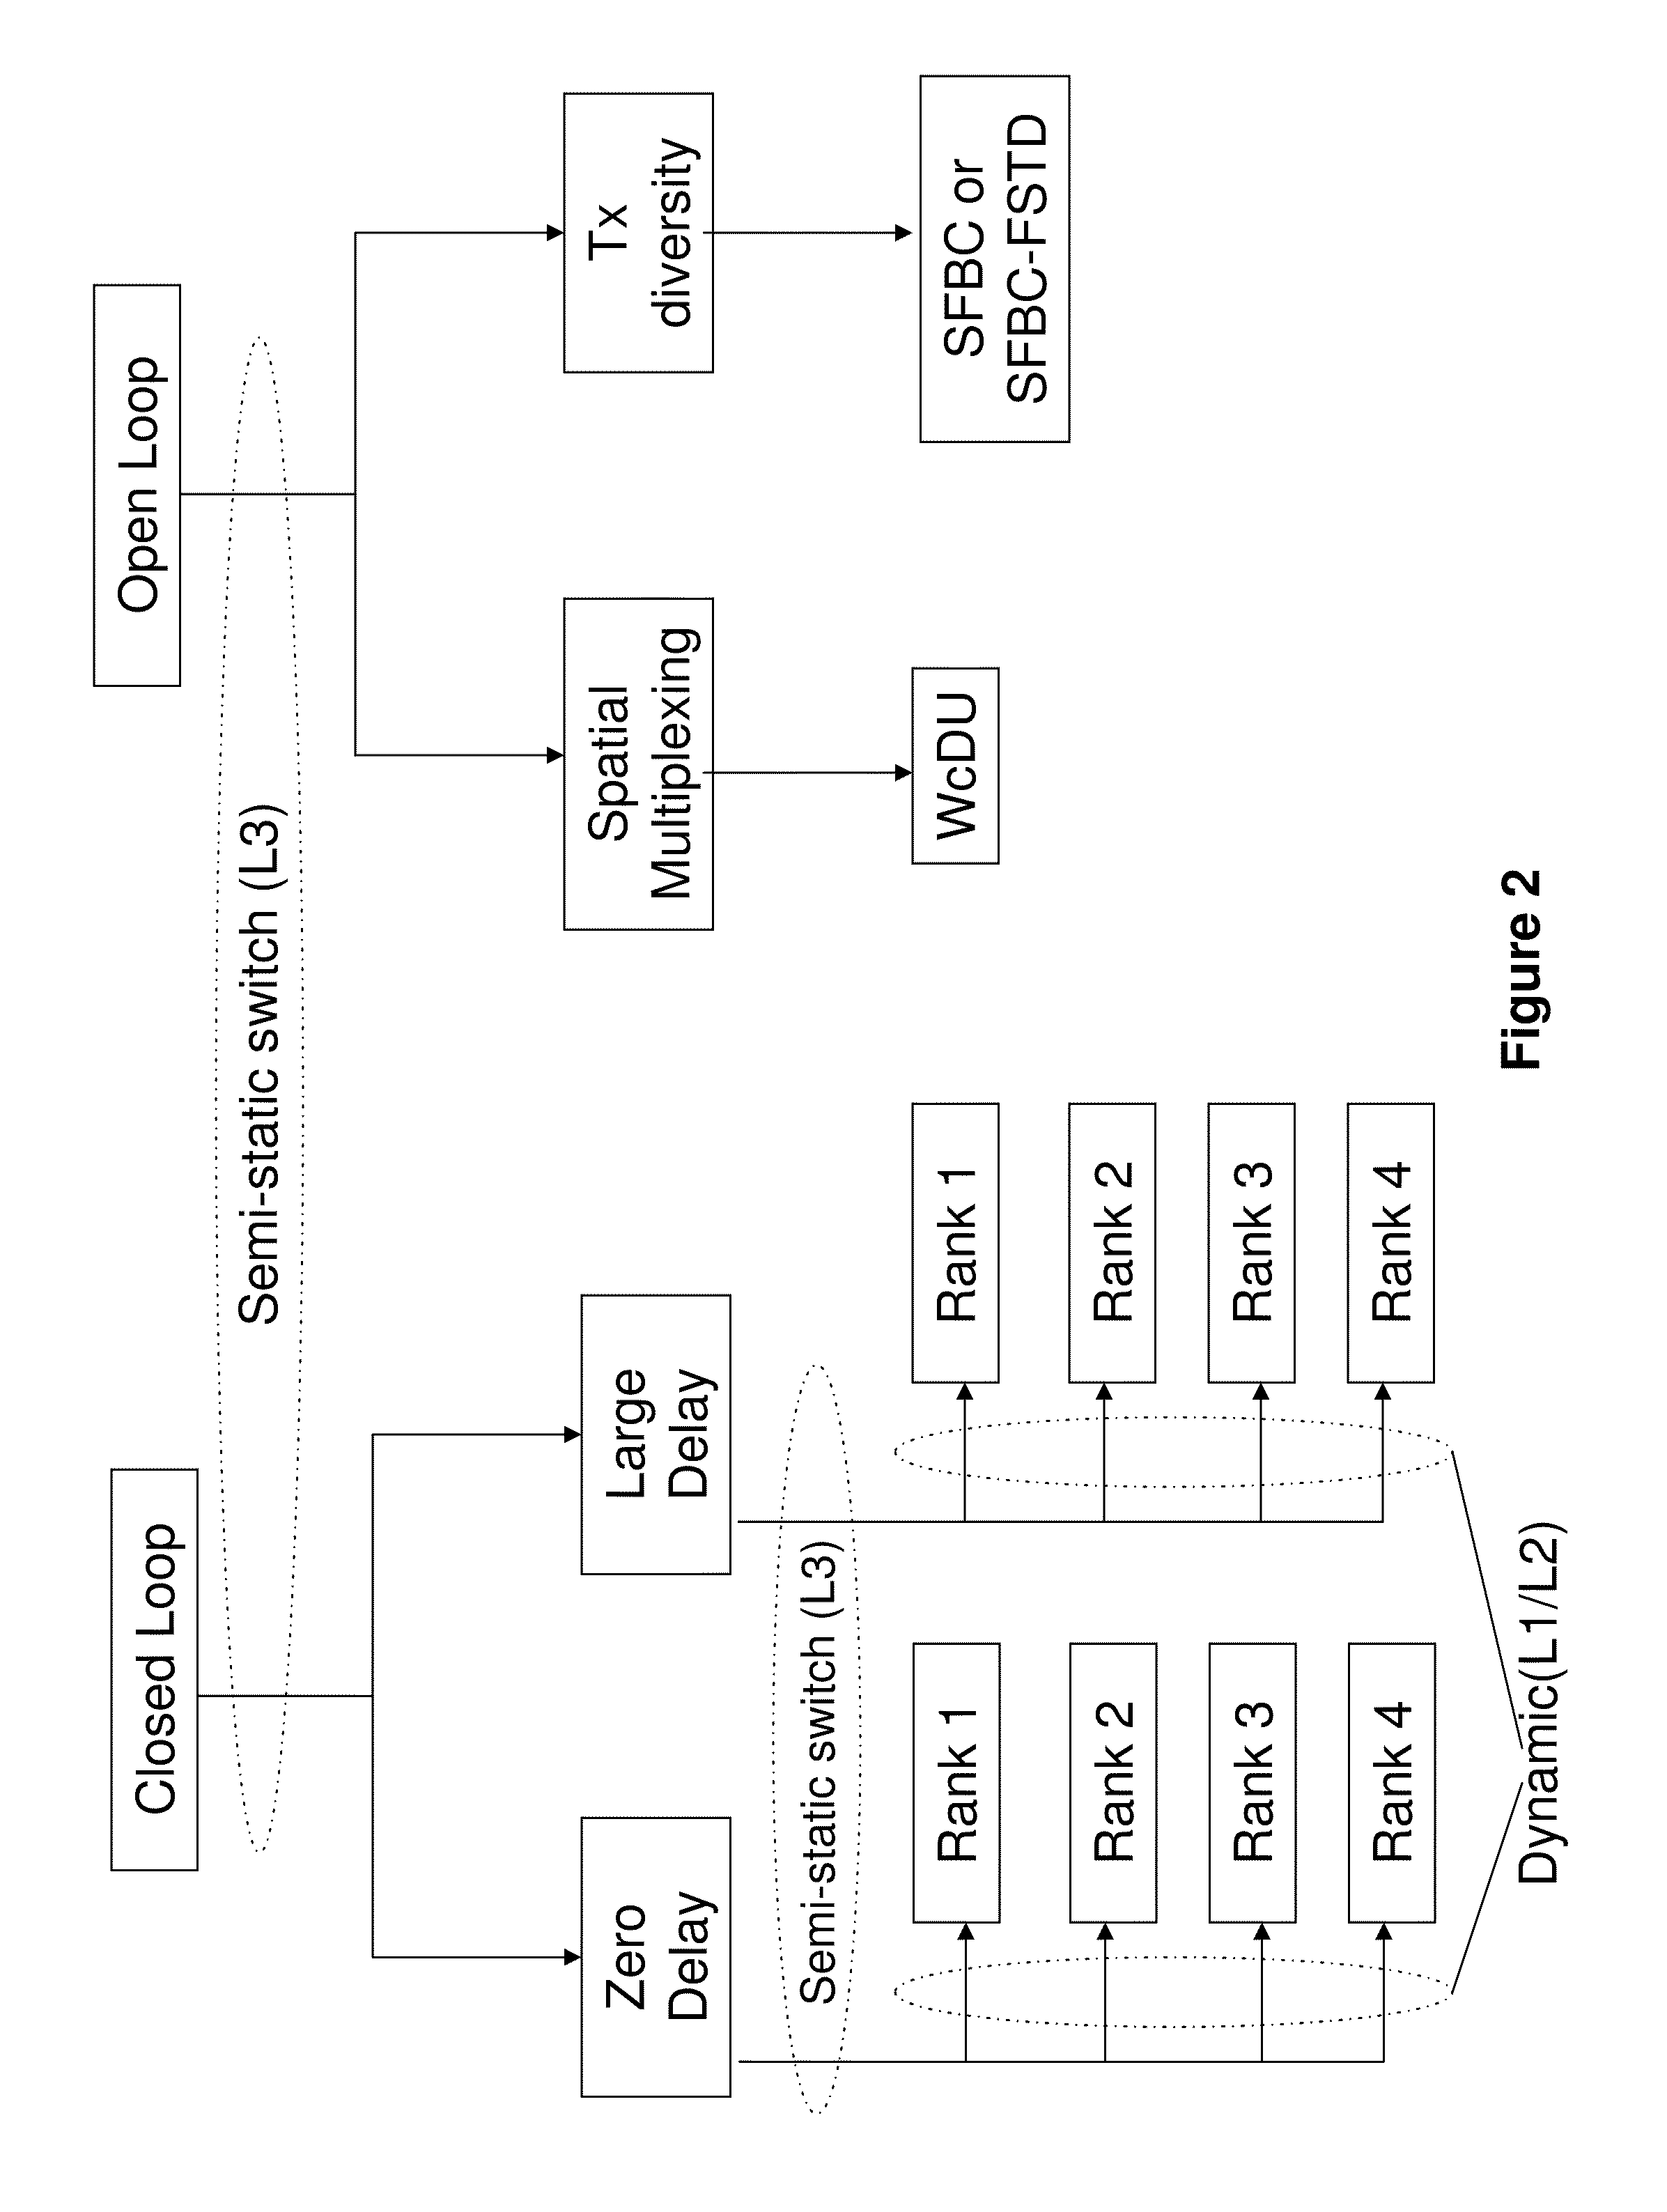 CQI table for wireless MIMO networks